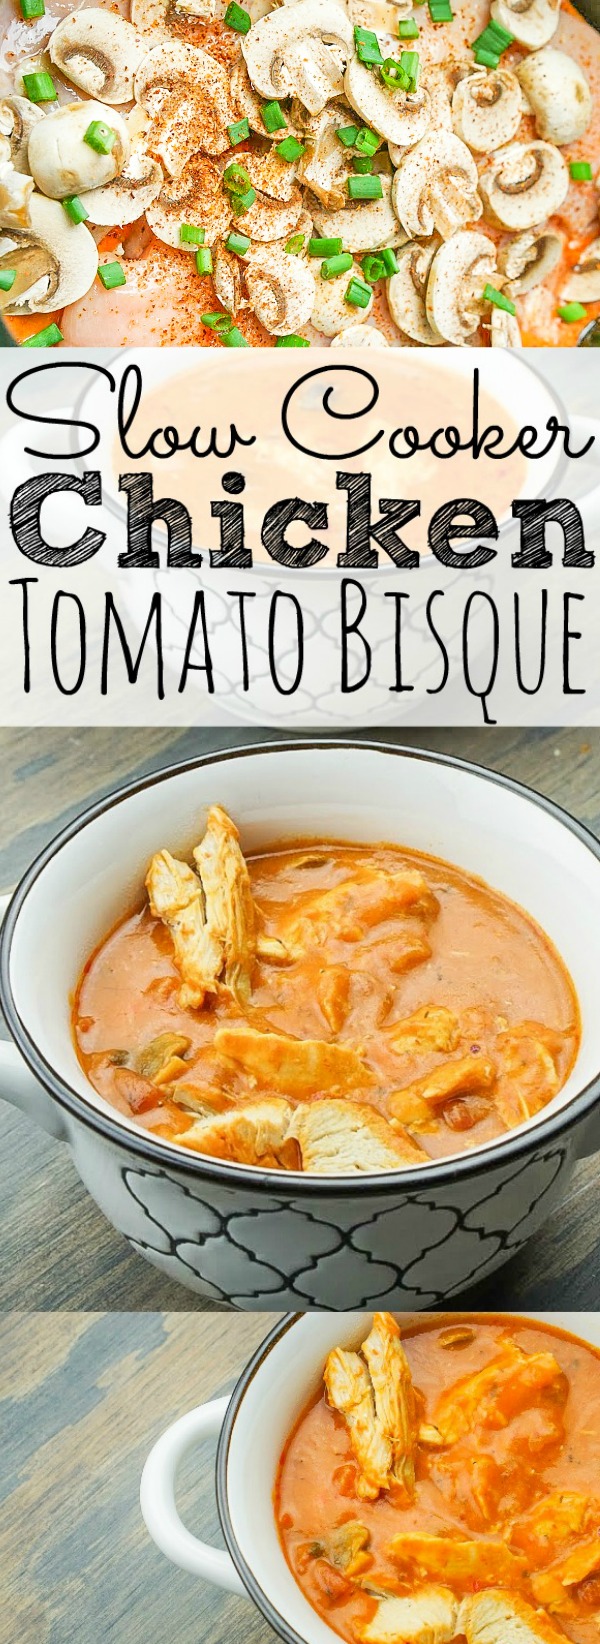 Slow Cooker Chicken Tomato Bisque Soup Recipe